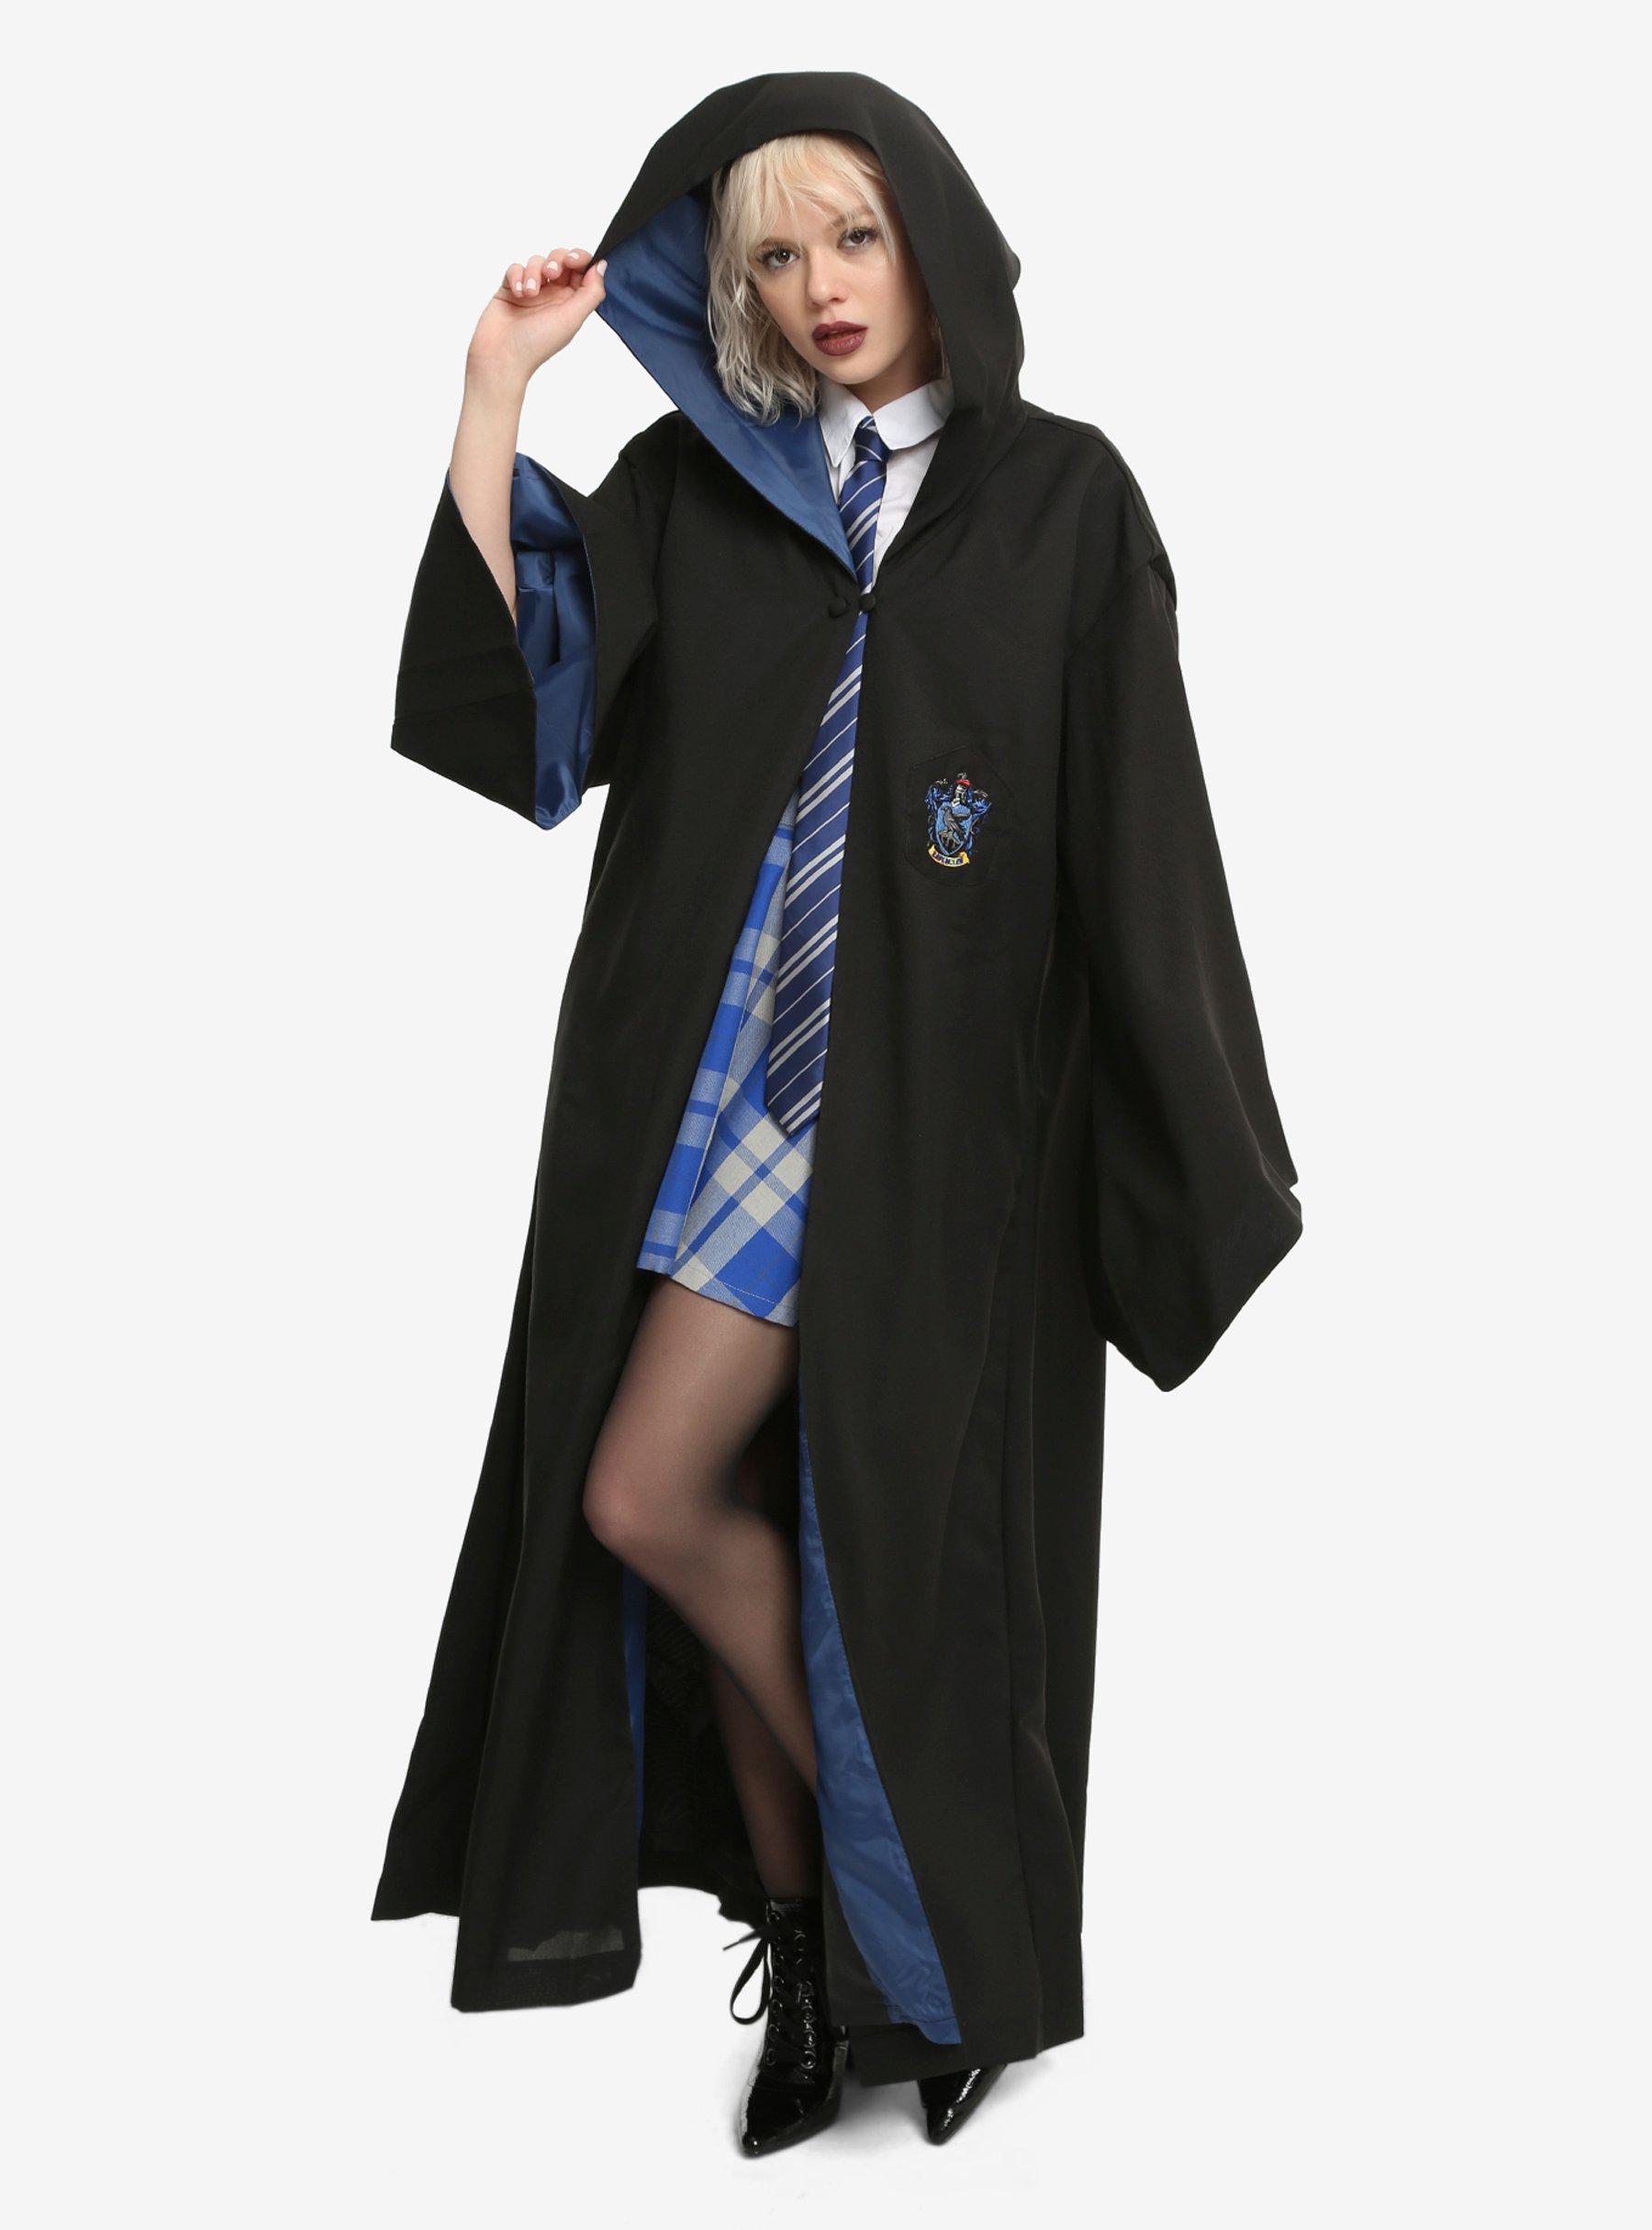 Hp Ravenclaw Robes M Costume